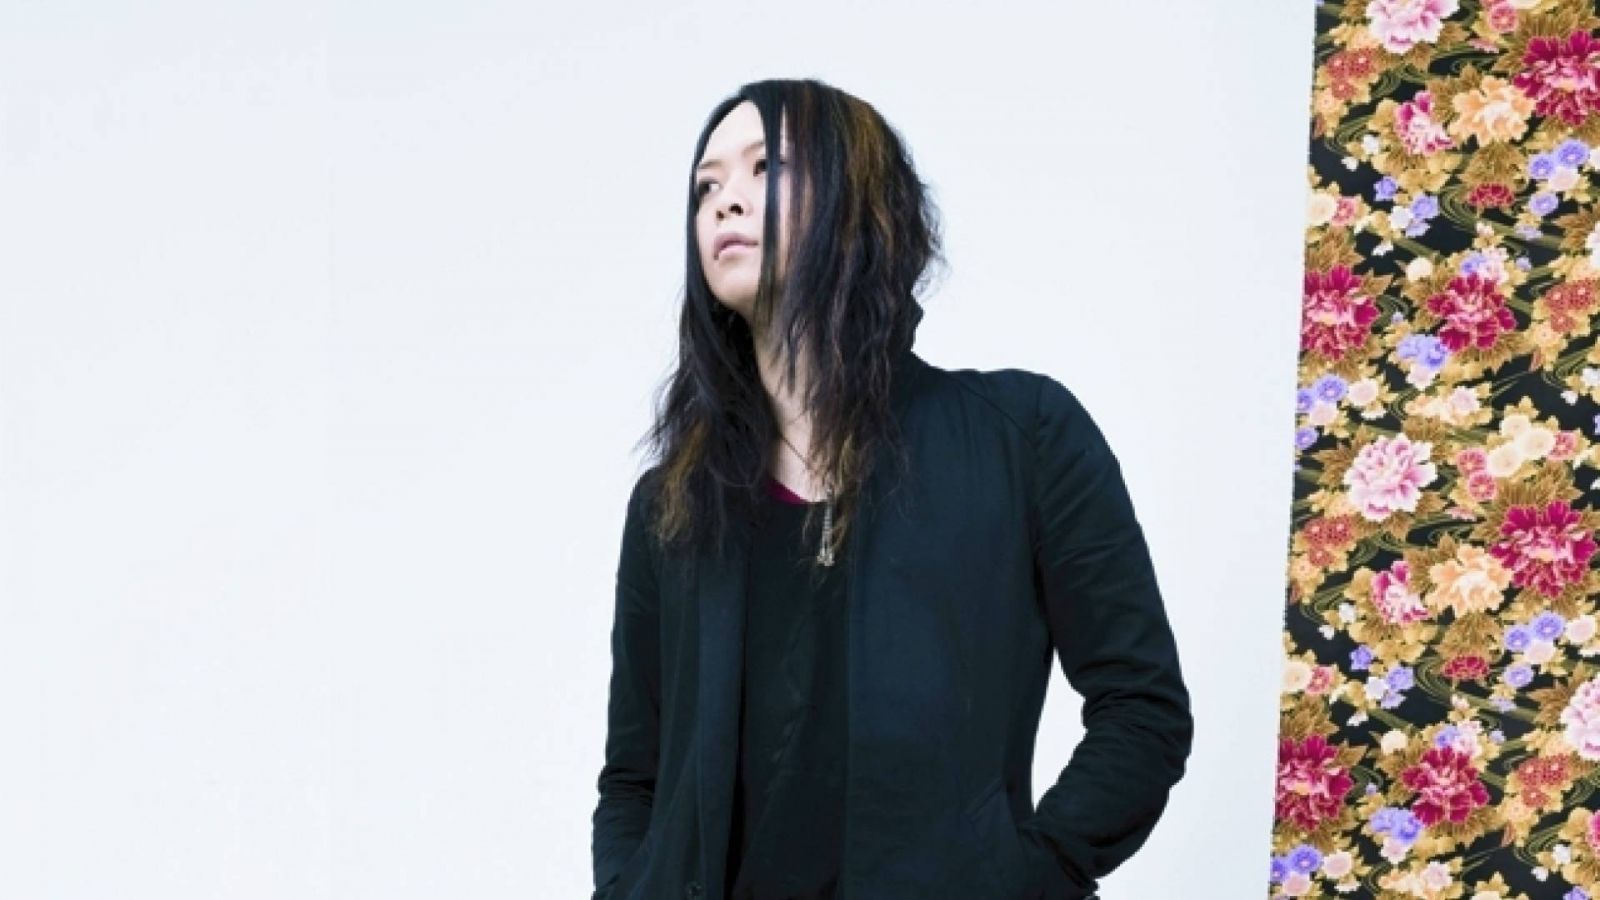 Zy 46: Tatsuro (MUCC) © 2009 Zy.connection Inc. All Rights Reserved.